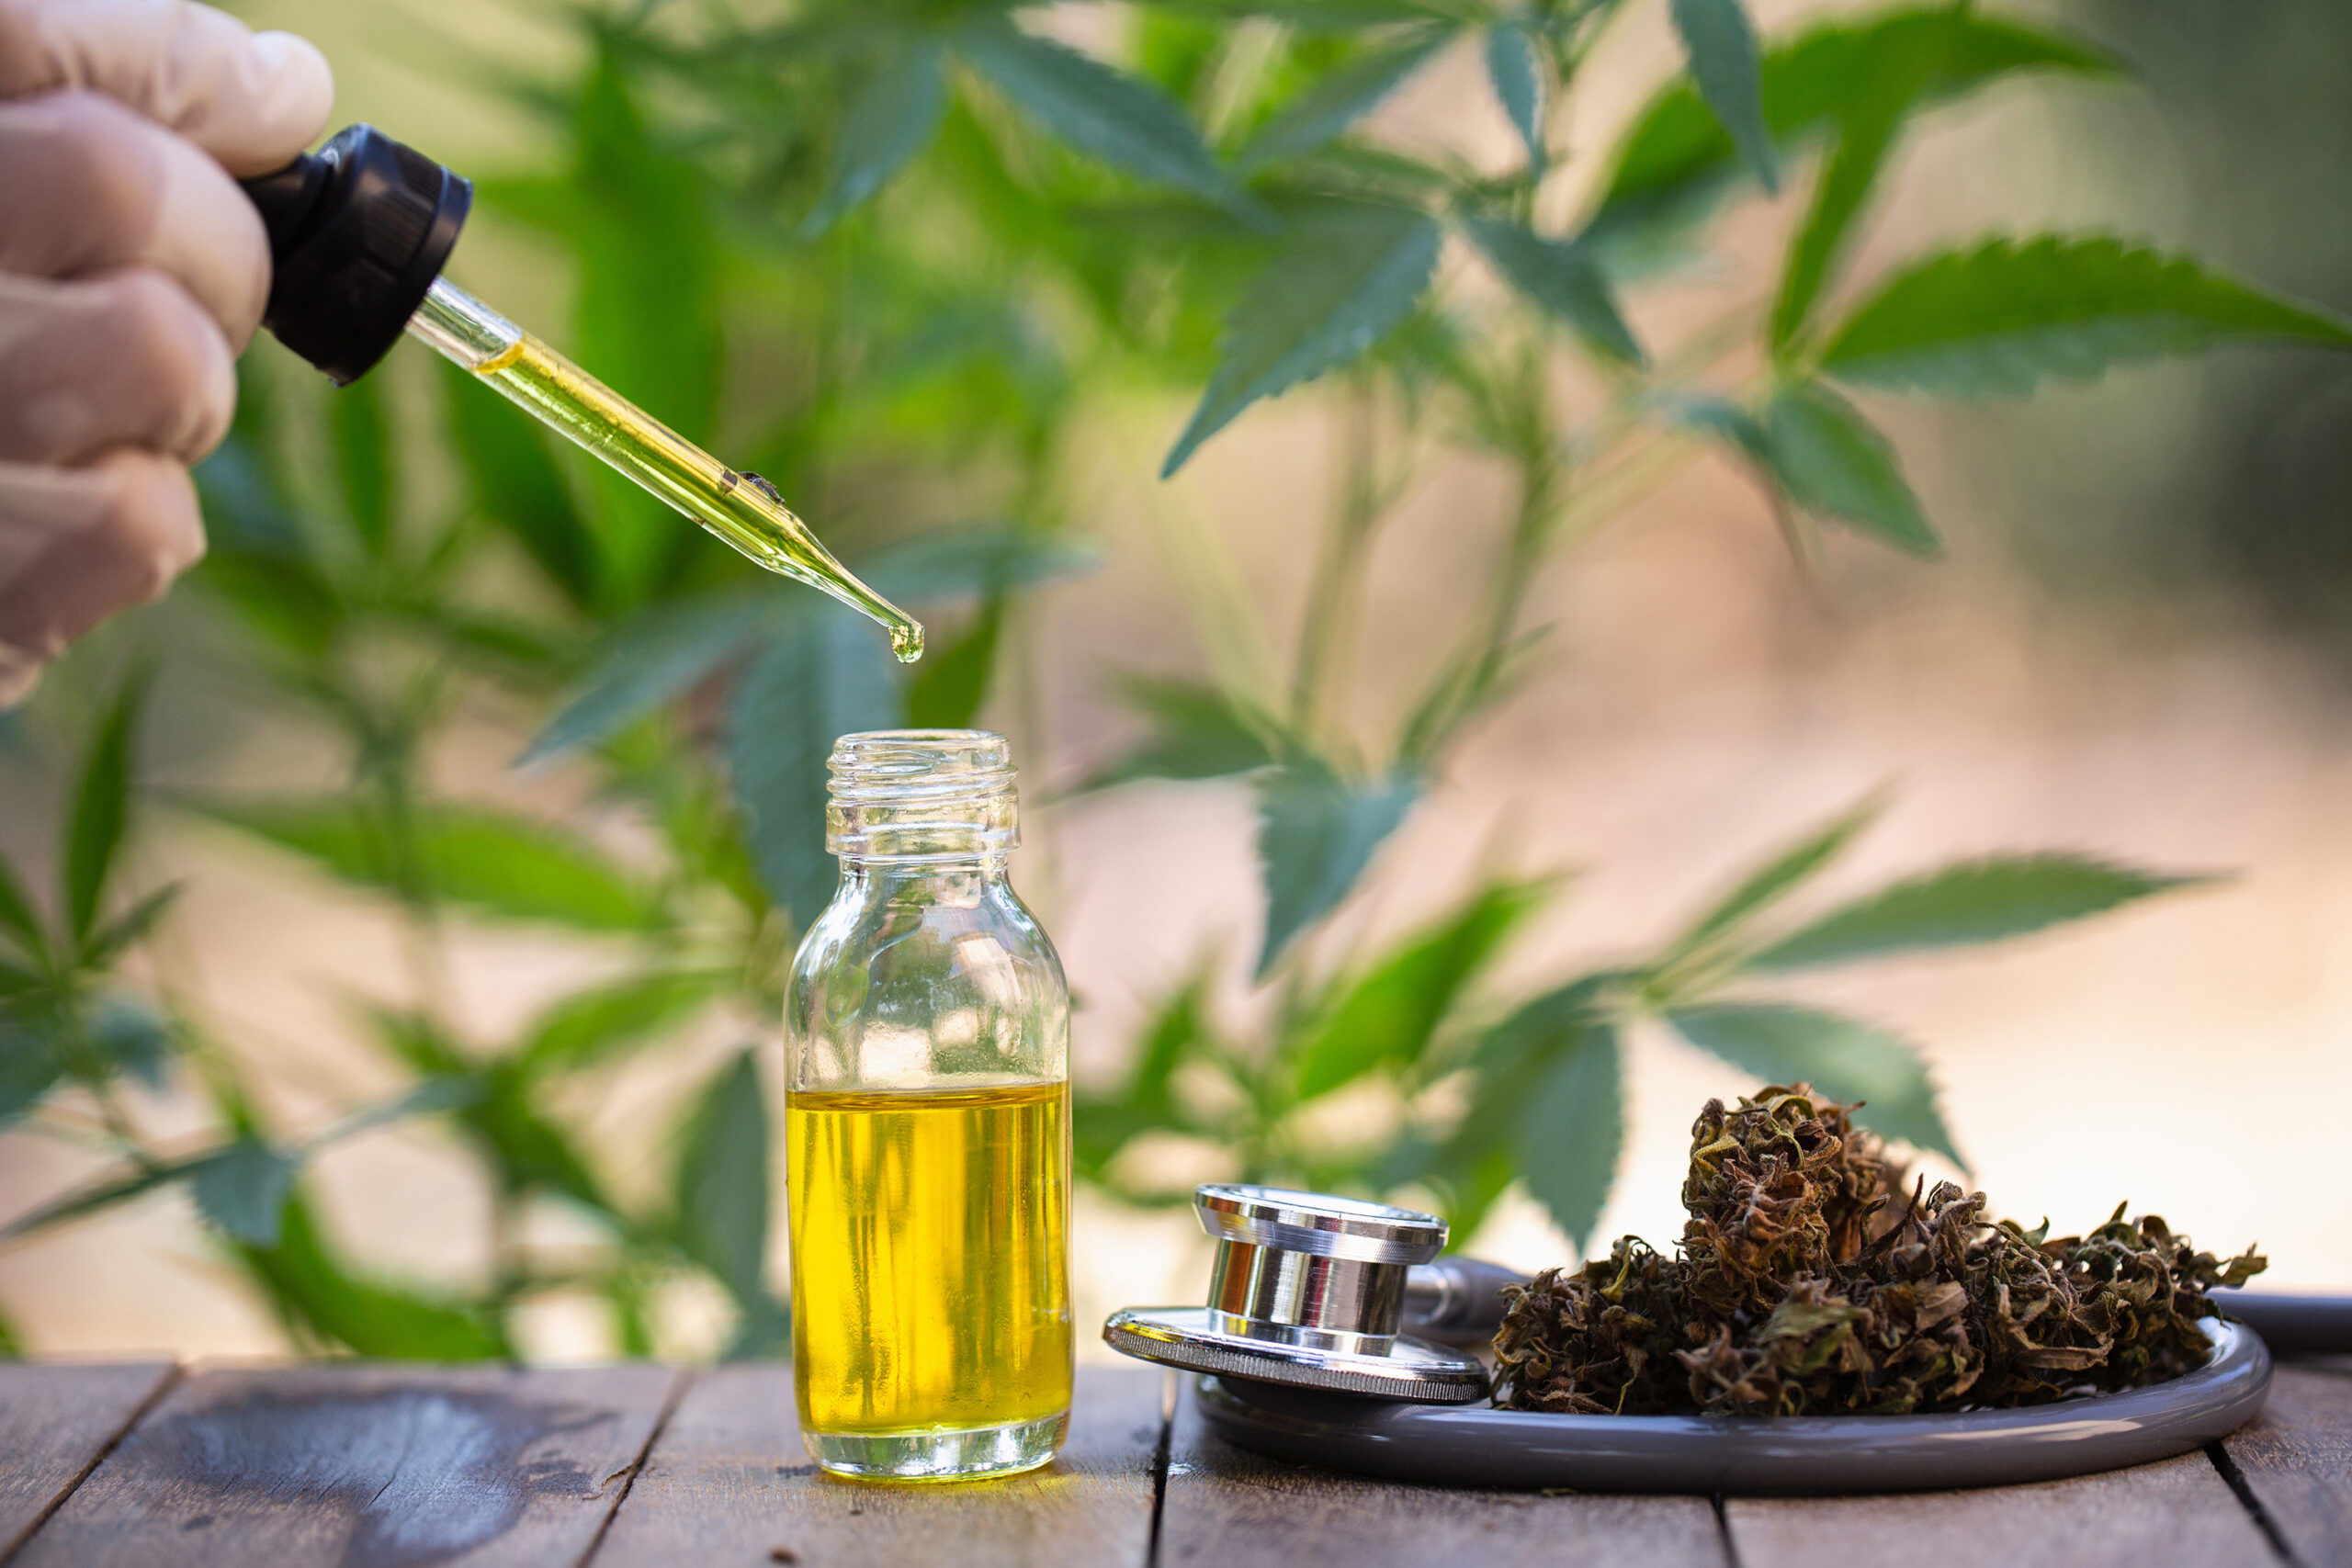 How Is CBD Made?